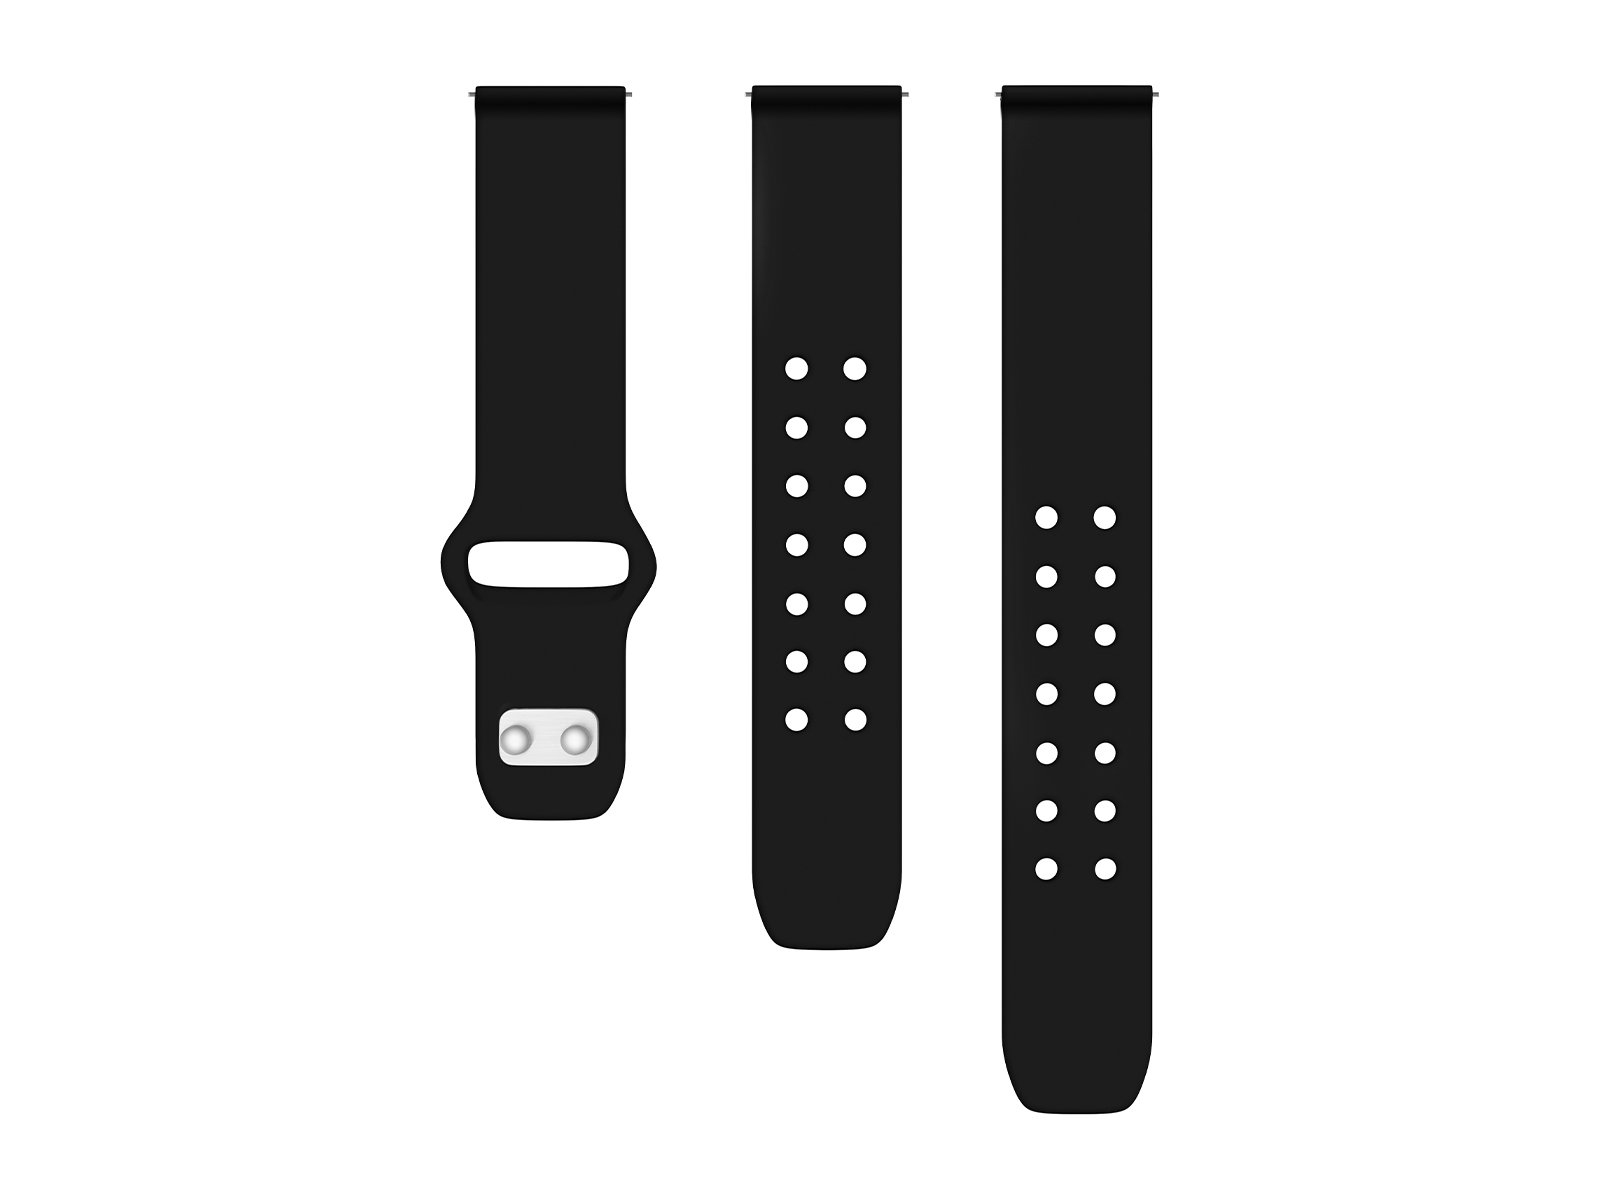 Solid Black Elastic Watch Band – Palmetto Bands